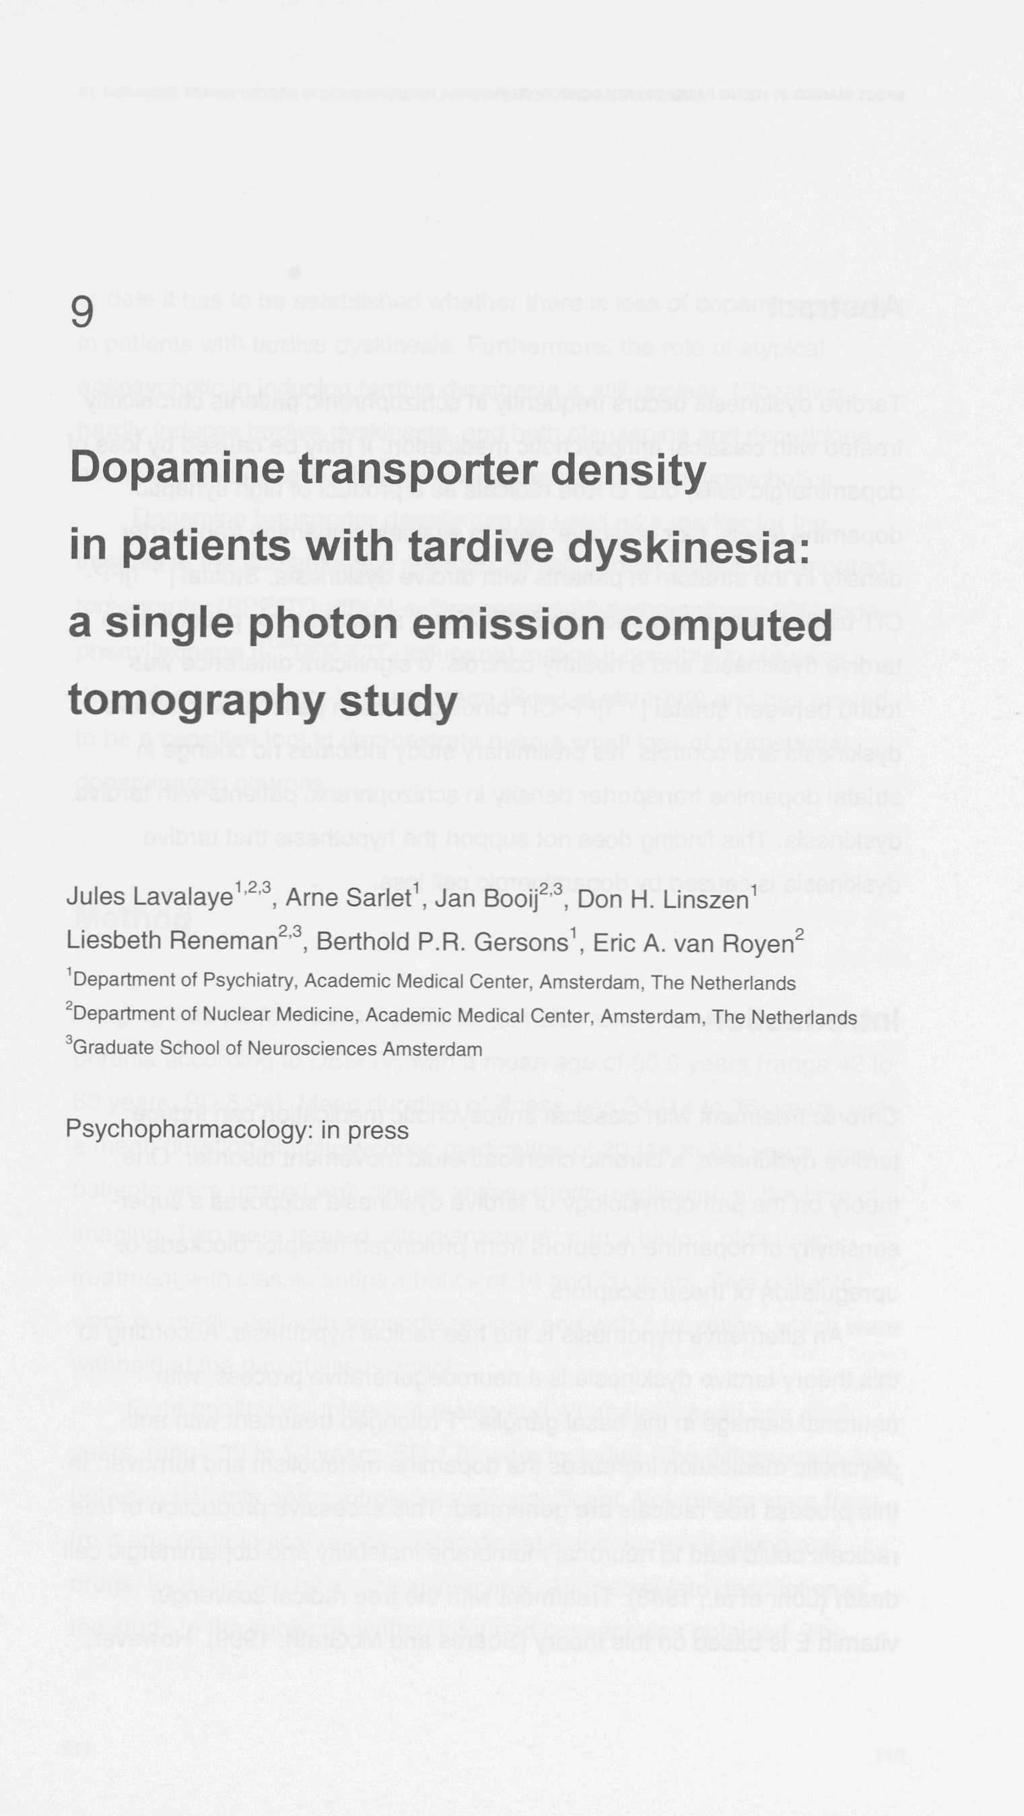 Dopamine transporter density in patients with tardive dyskinesia: a single photon emission computed tomography study Jules Lavalaye 1,2,3, Arne Sarlet 1, Jan Booij 2,3, Don H.